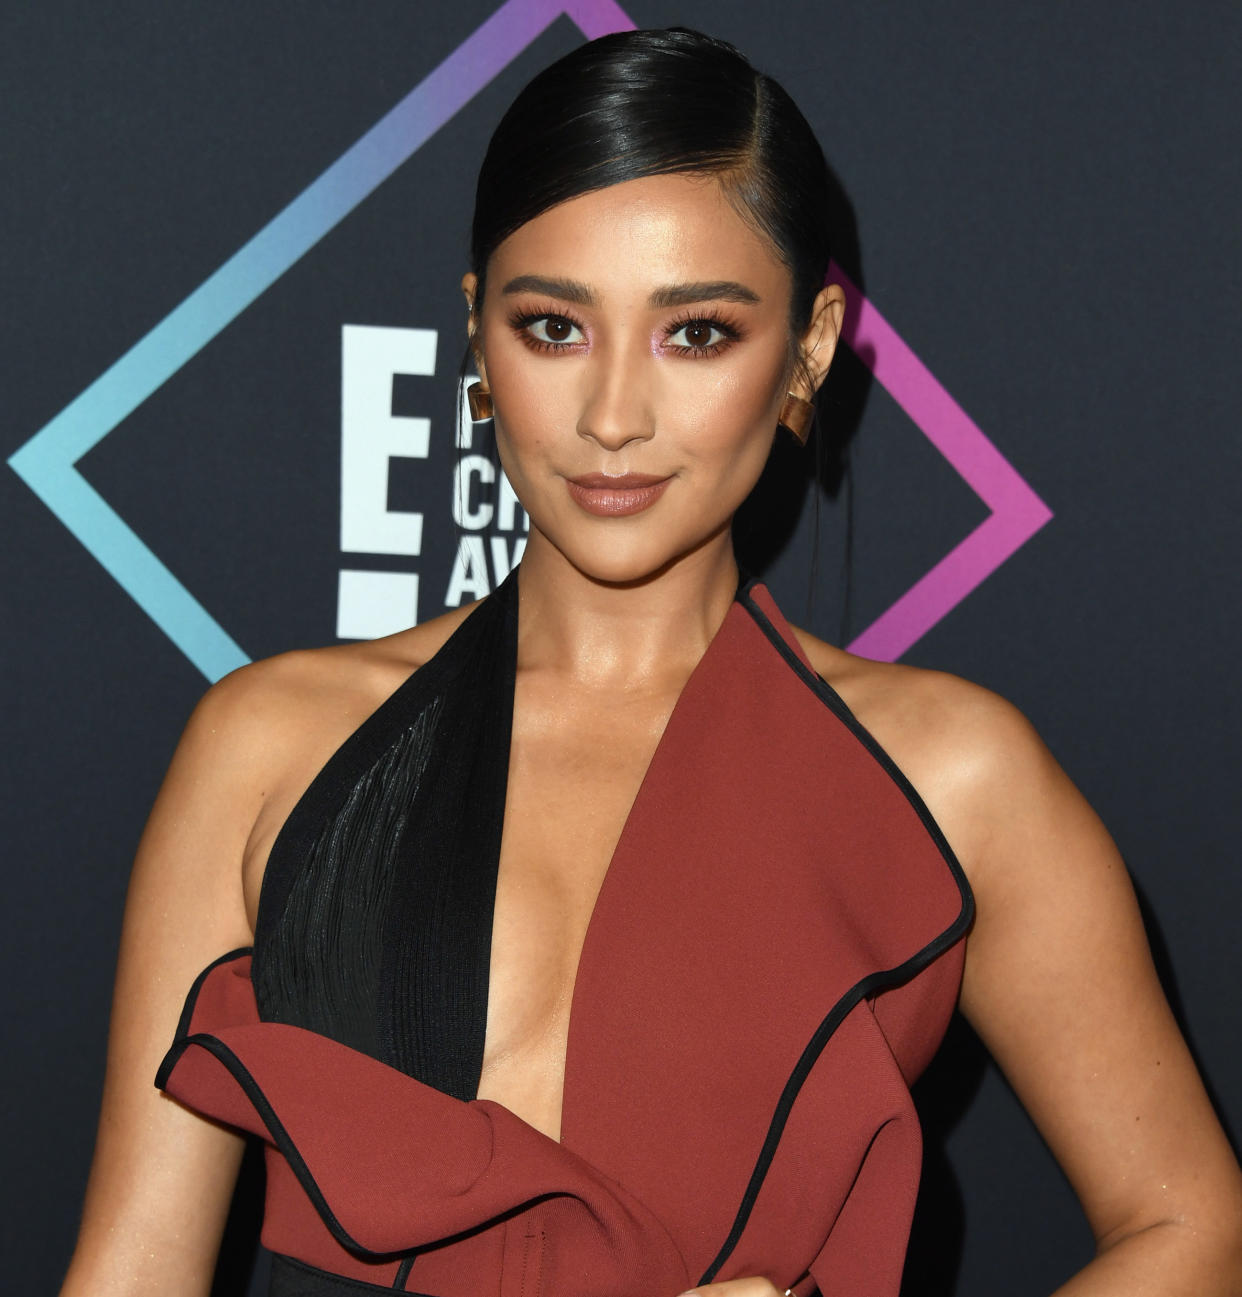 Shay Mitchell. Image via Getty Images.